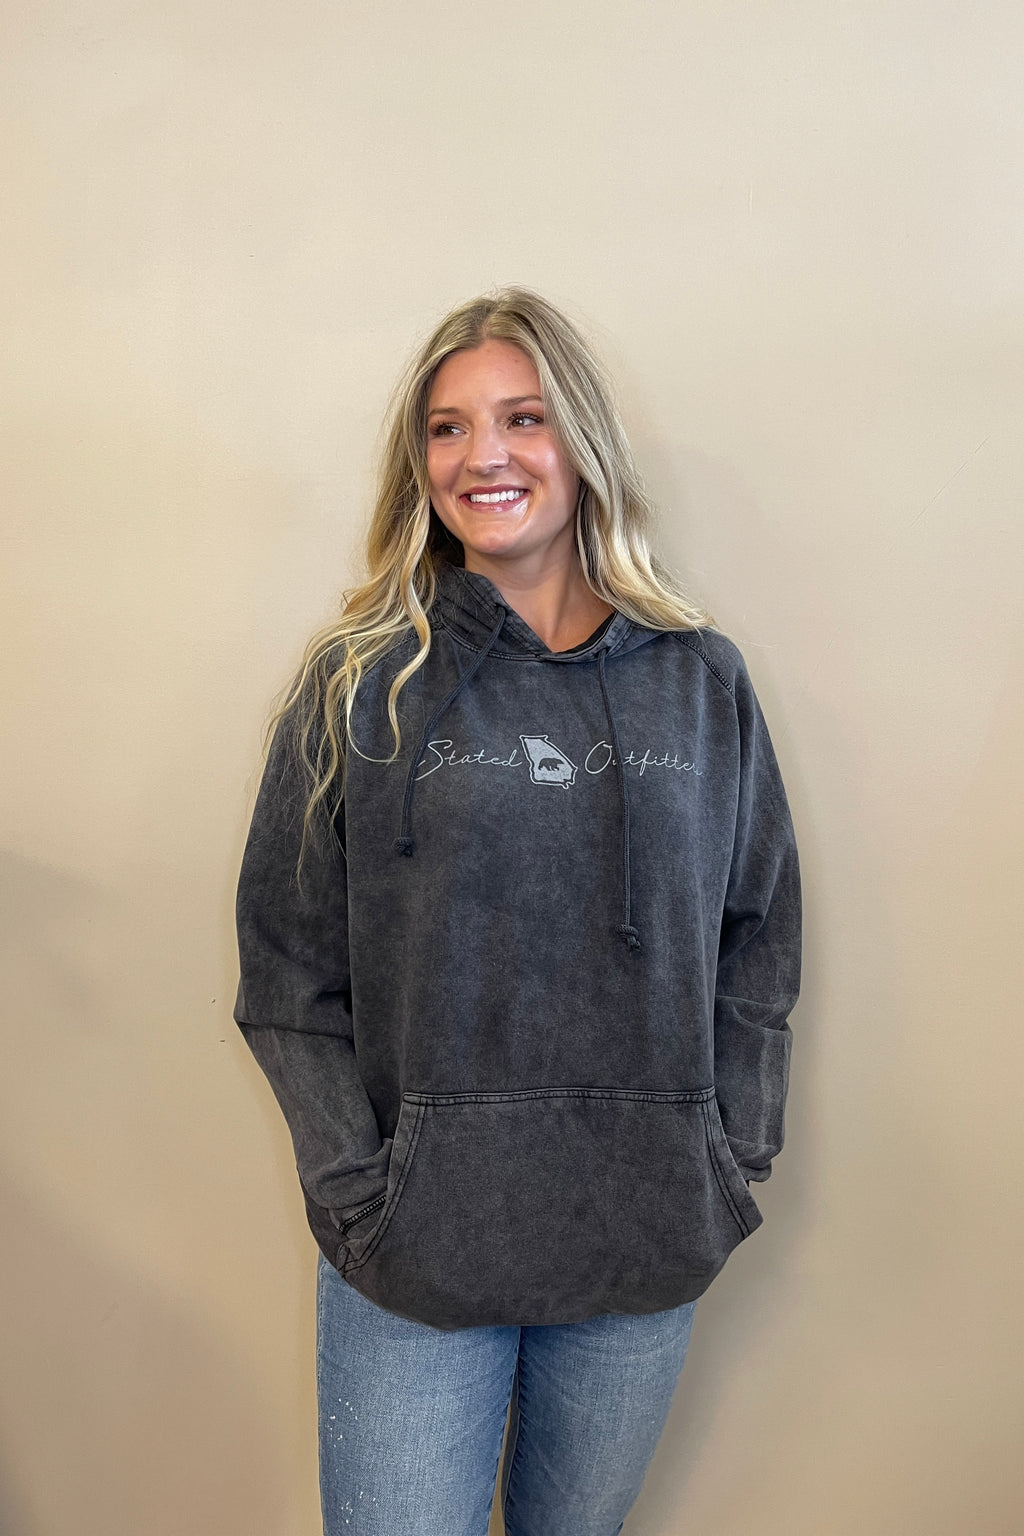 Stated Outfitter Georgia Hoodie